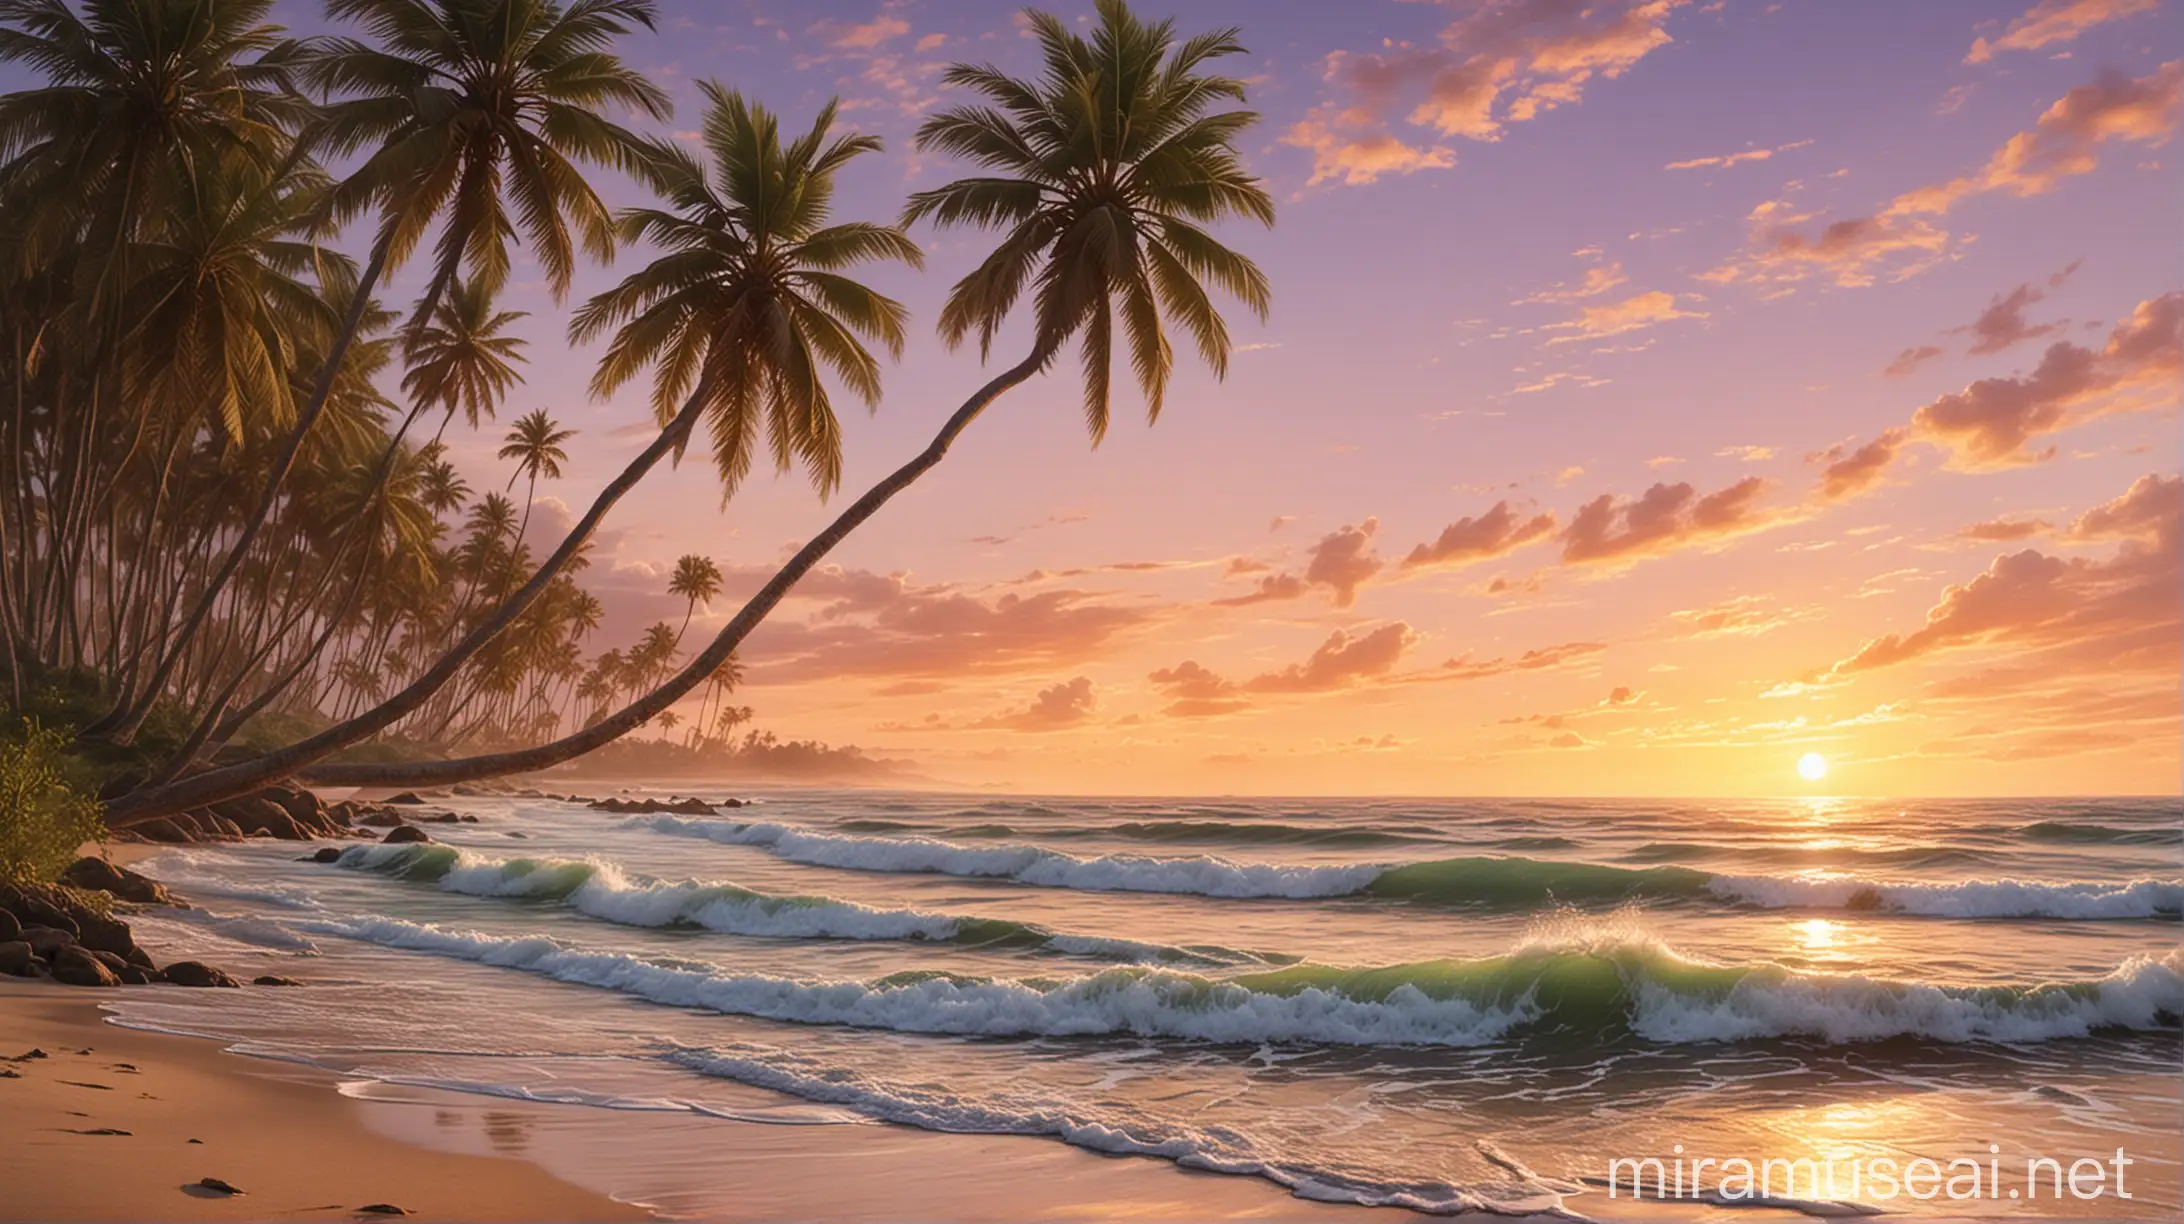 Serene Sunset Beach Scene with Palm Trees and Gentle Waves